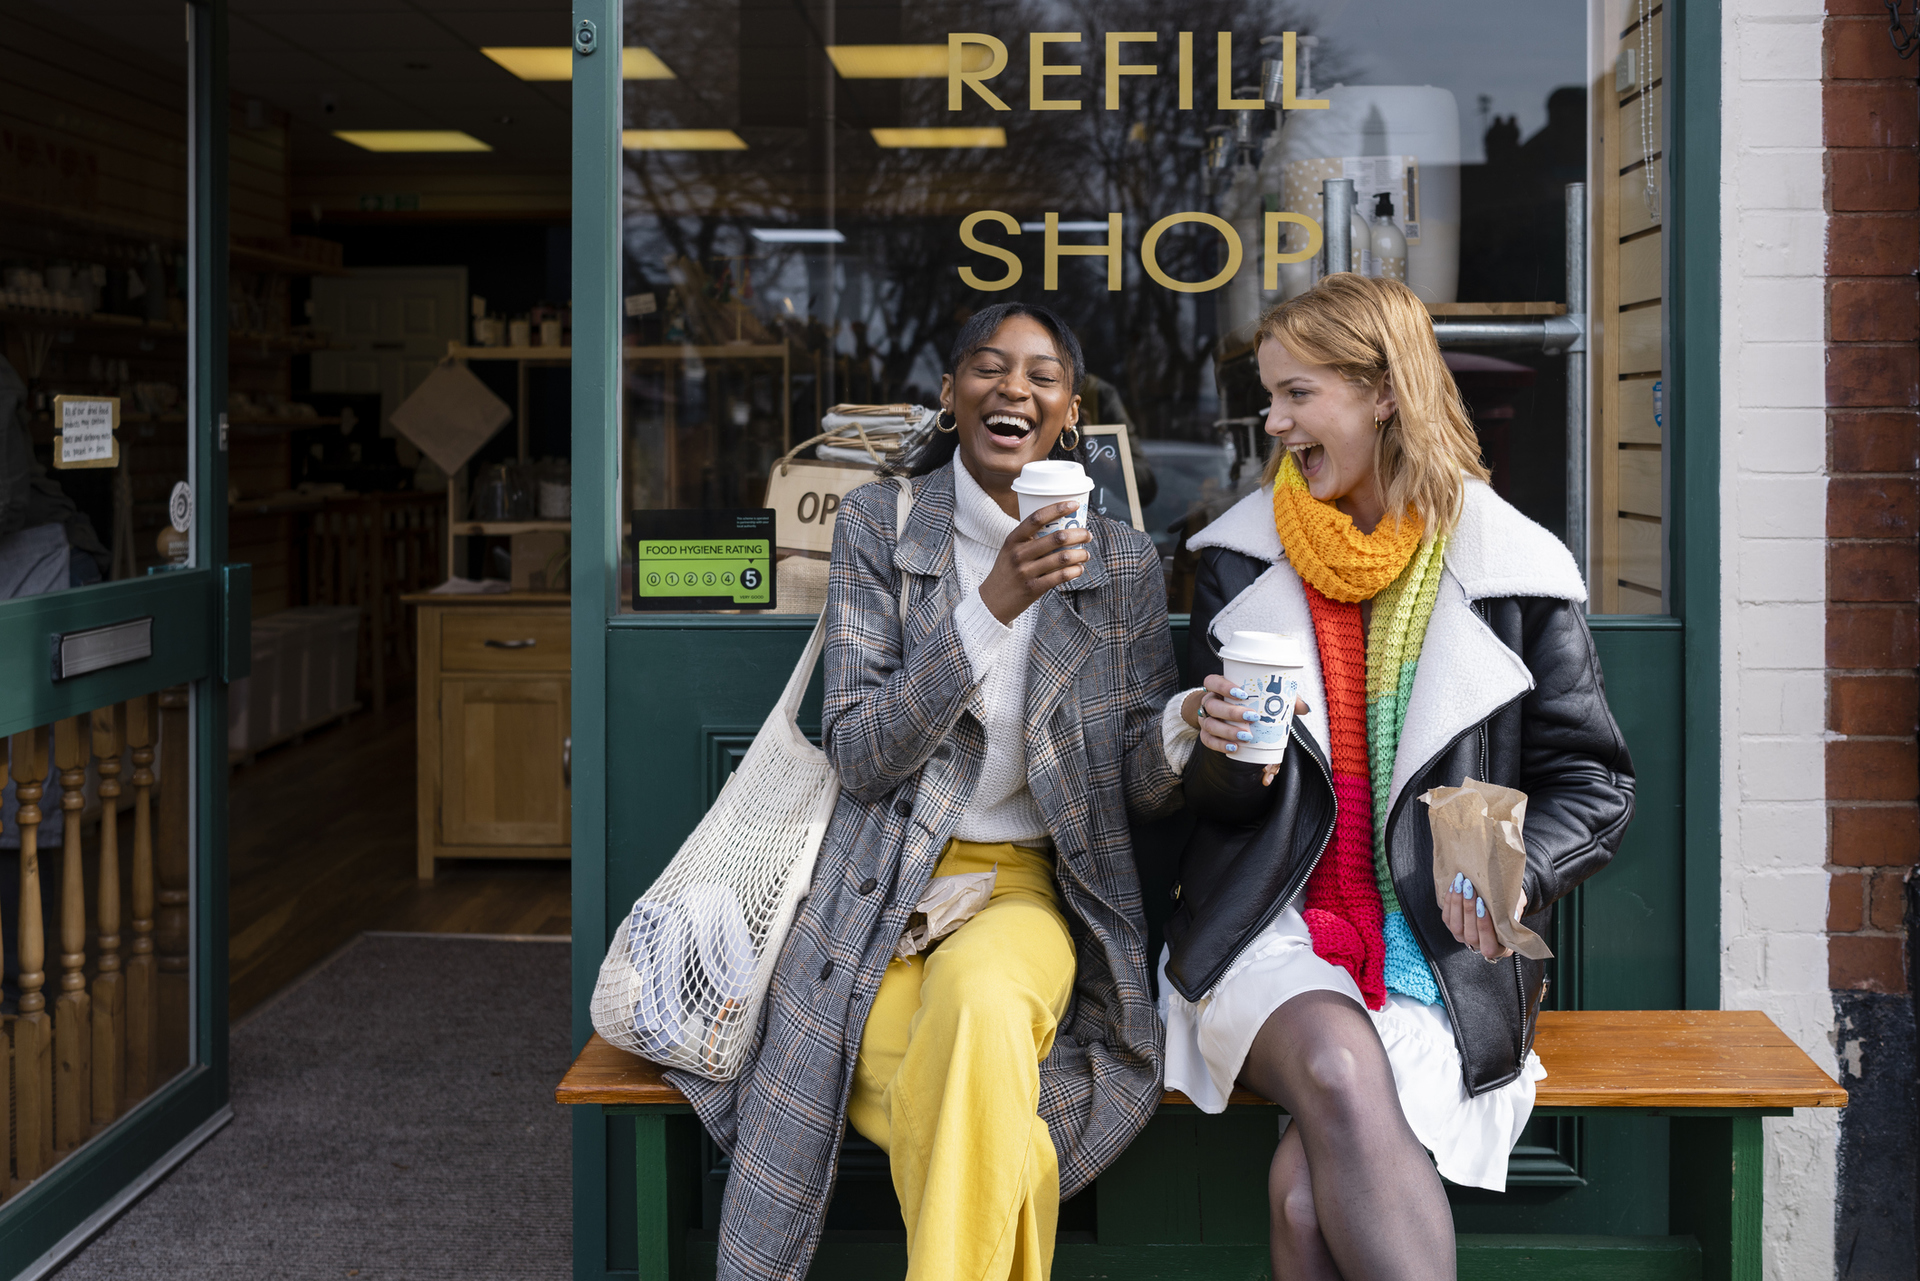 Two friends sitting outside a store that promotes sustainable living in the North East of England.